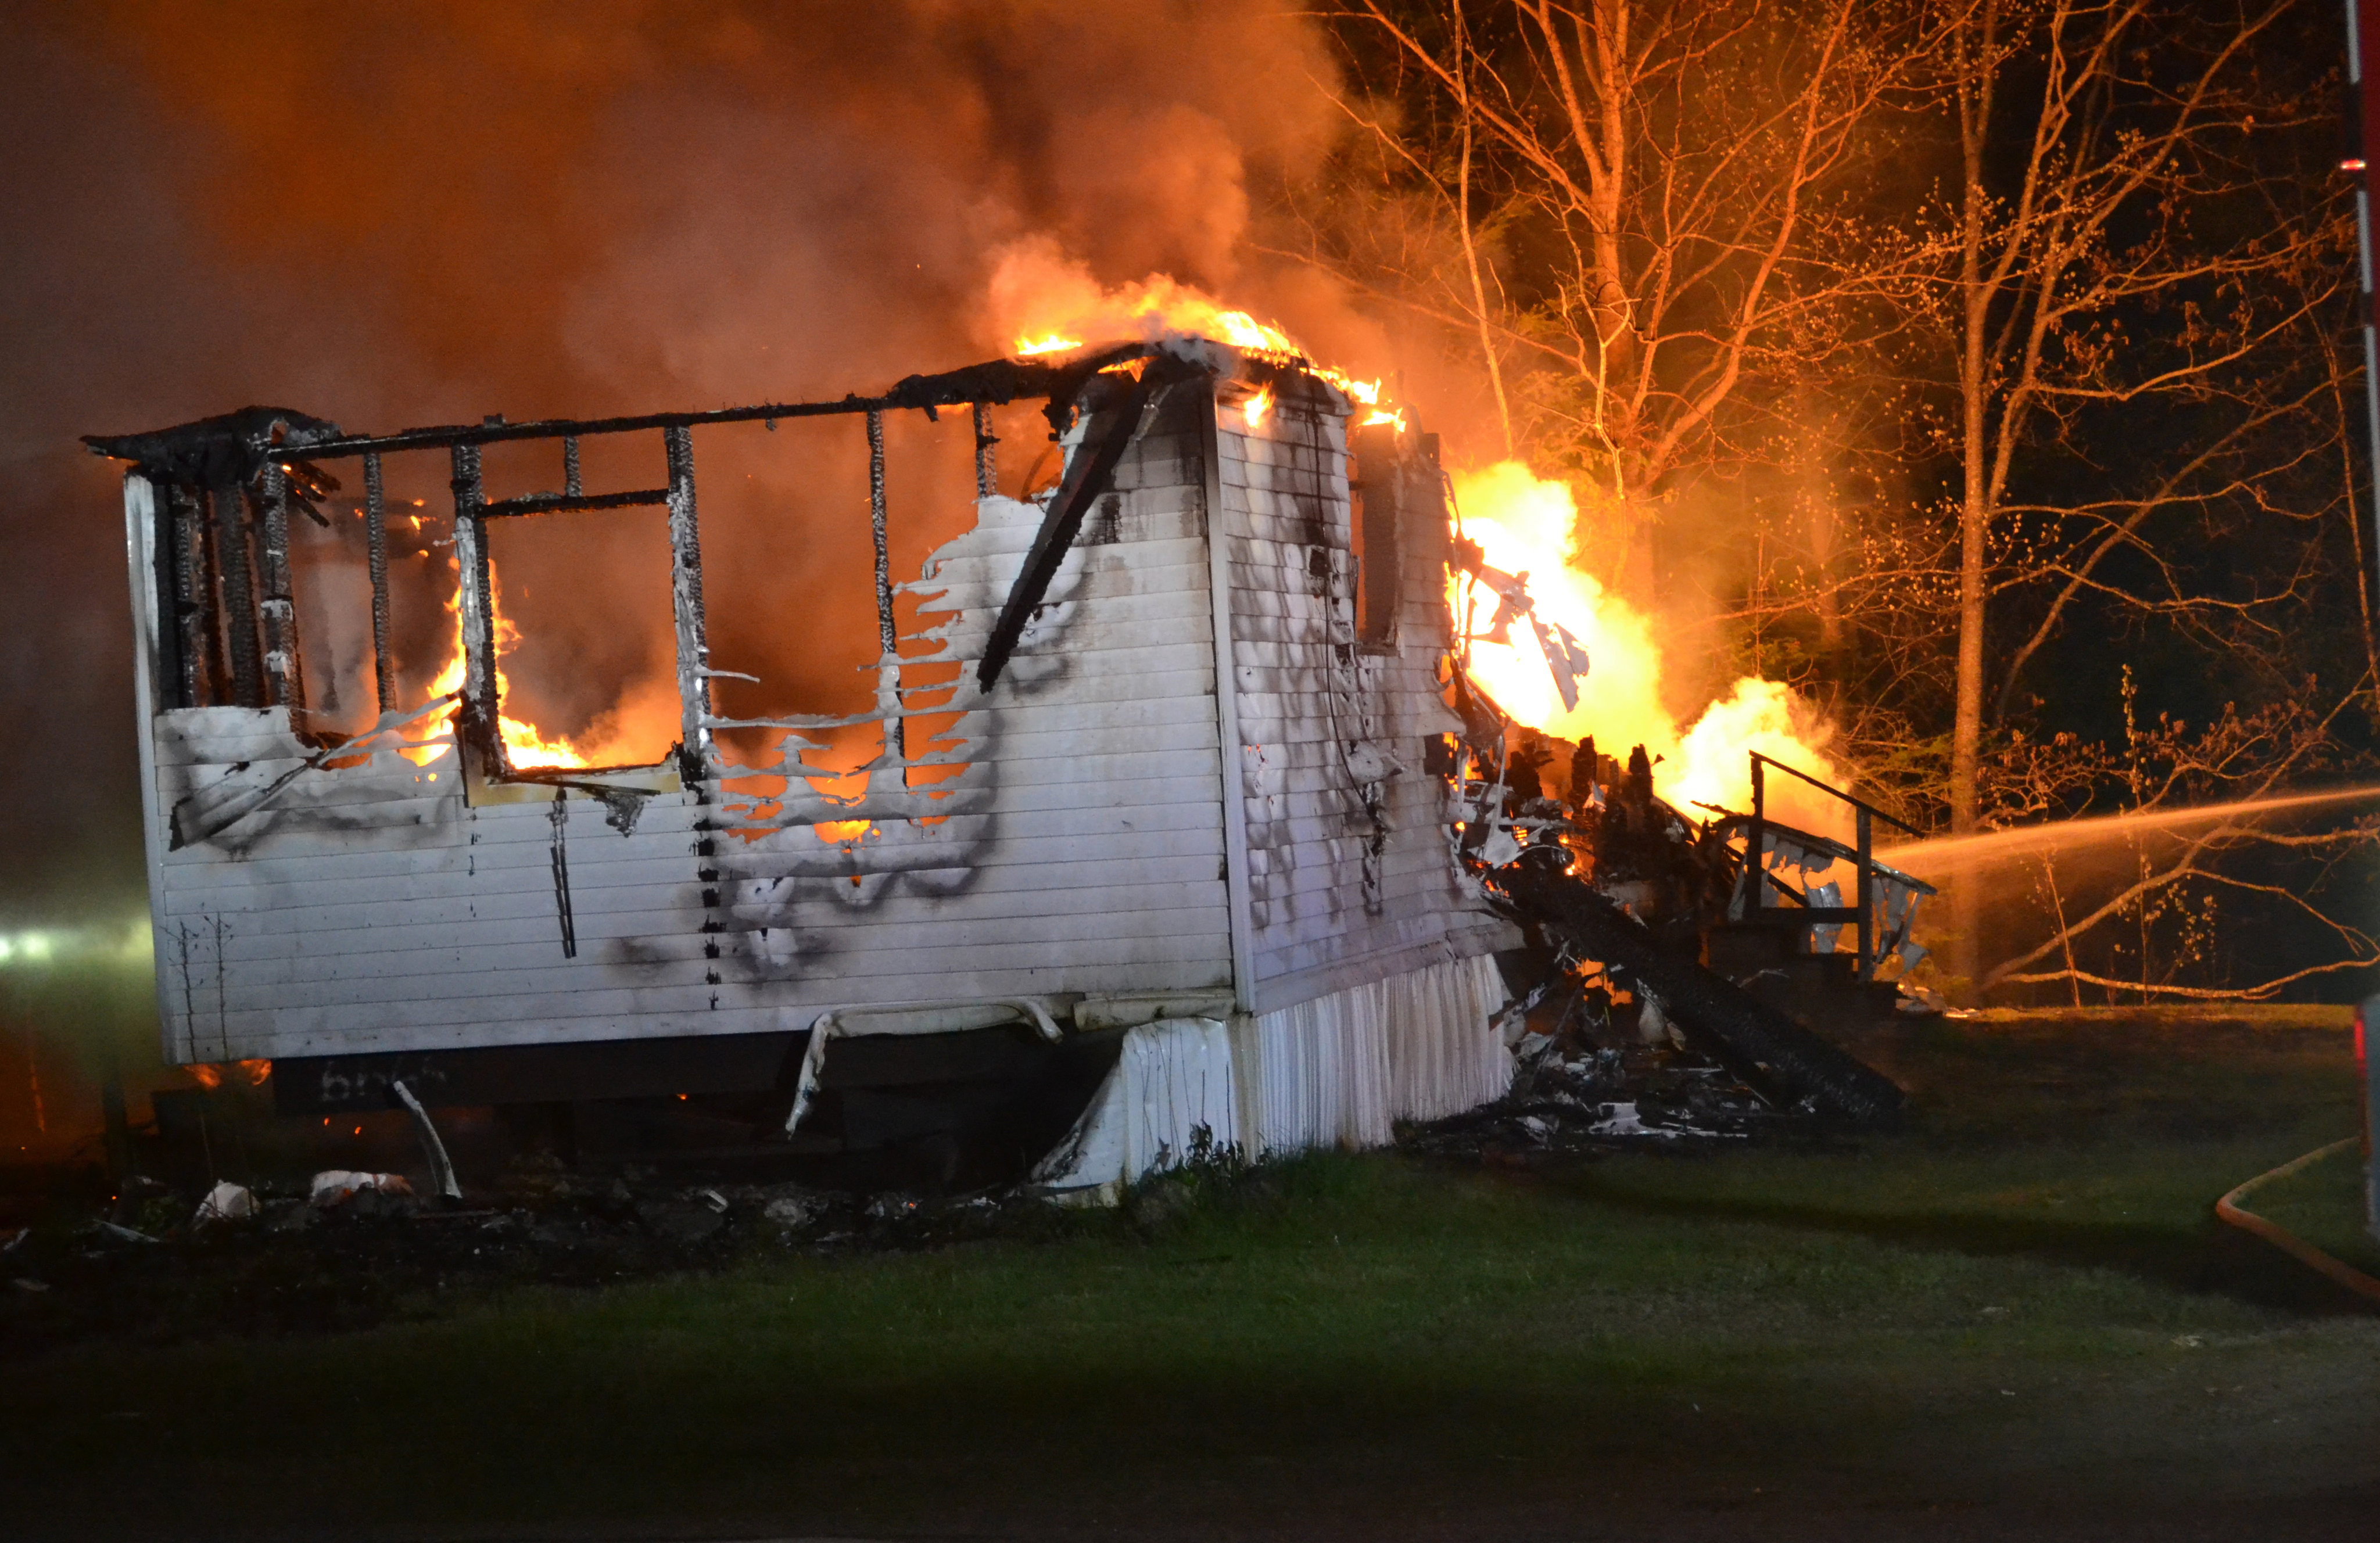 Flames rise from propane tanks behind a mobile home at Brookside Mobile Home Park in Waldoboro as firefighters work to prevent the spread of the fire to neighboring structures early Saturday, May 20. (Abigail Adams photo)